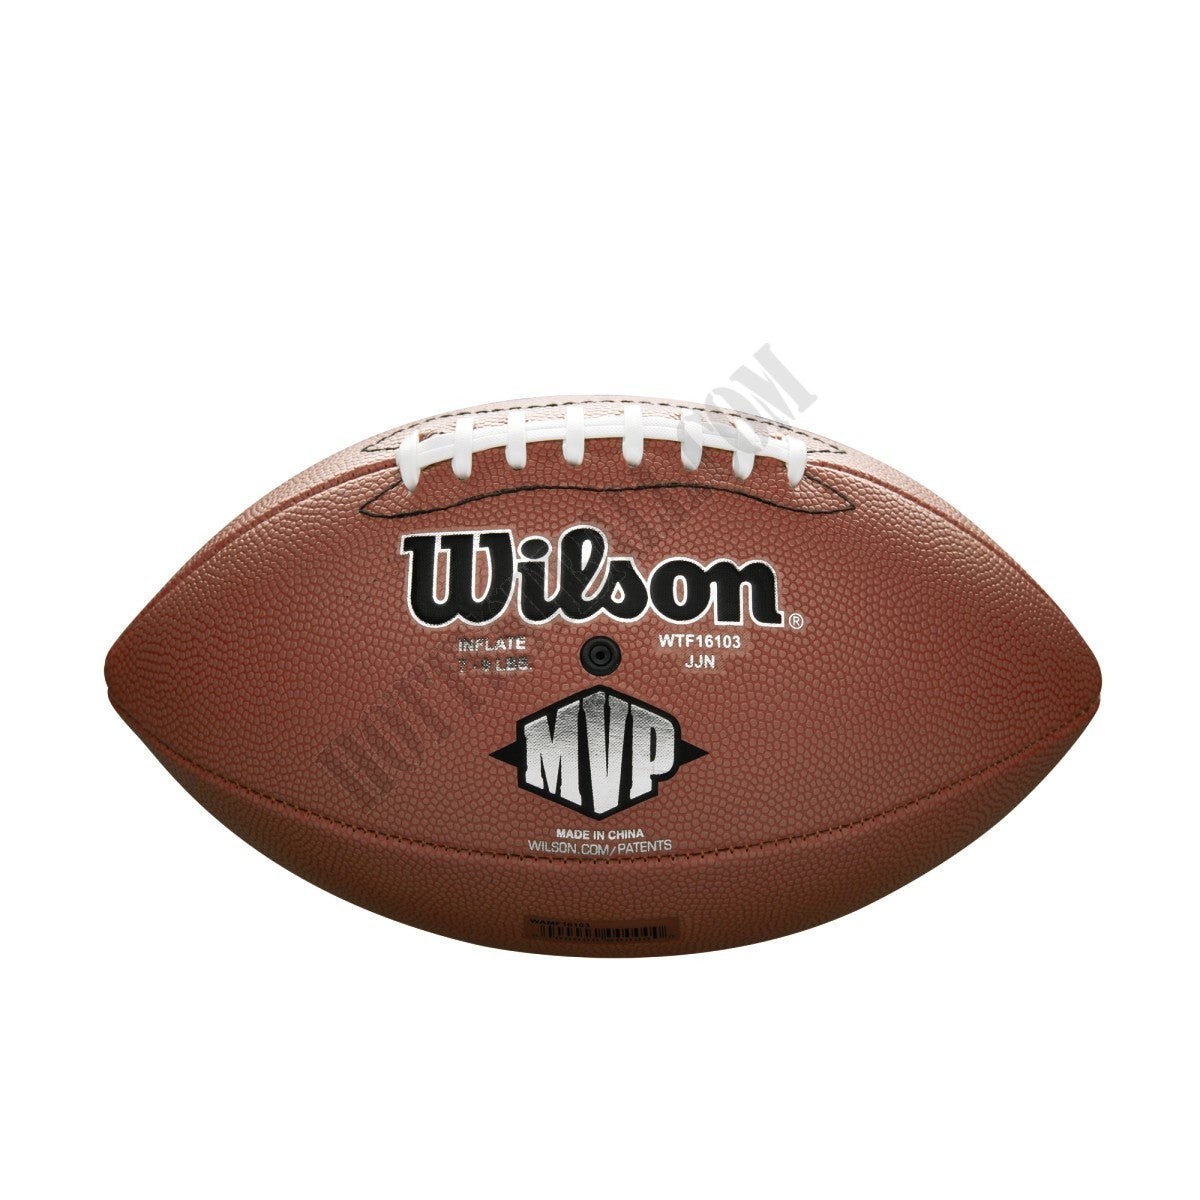 NFL MVP Football - Official ● Wilson Promotions - -1